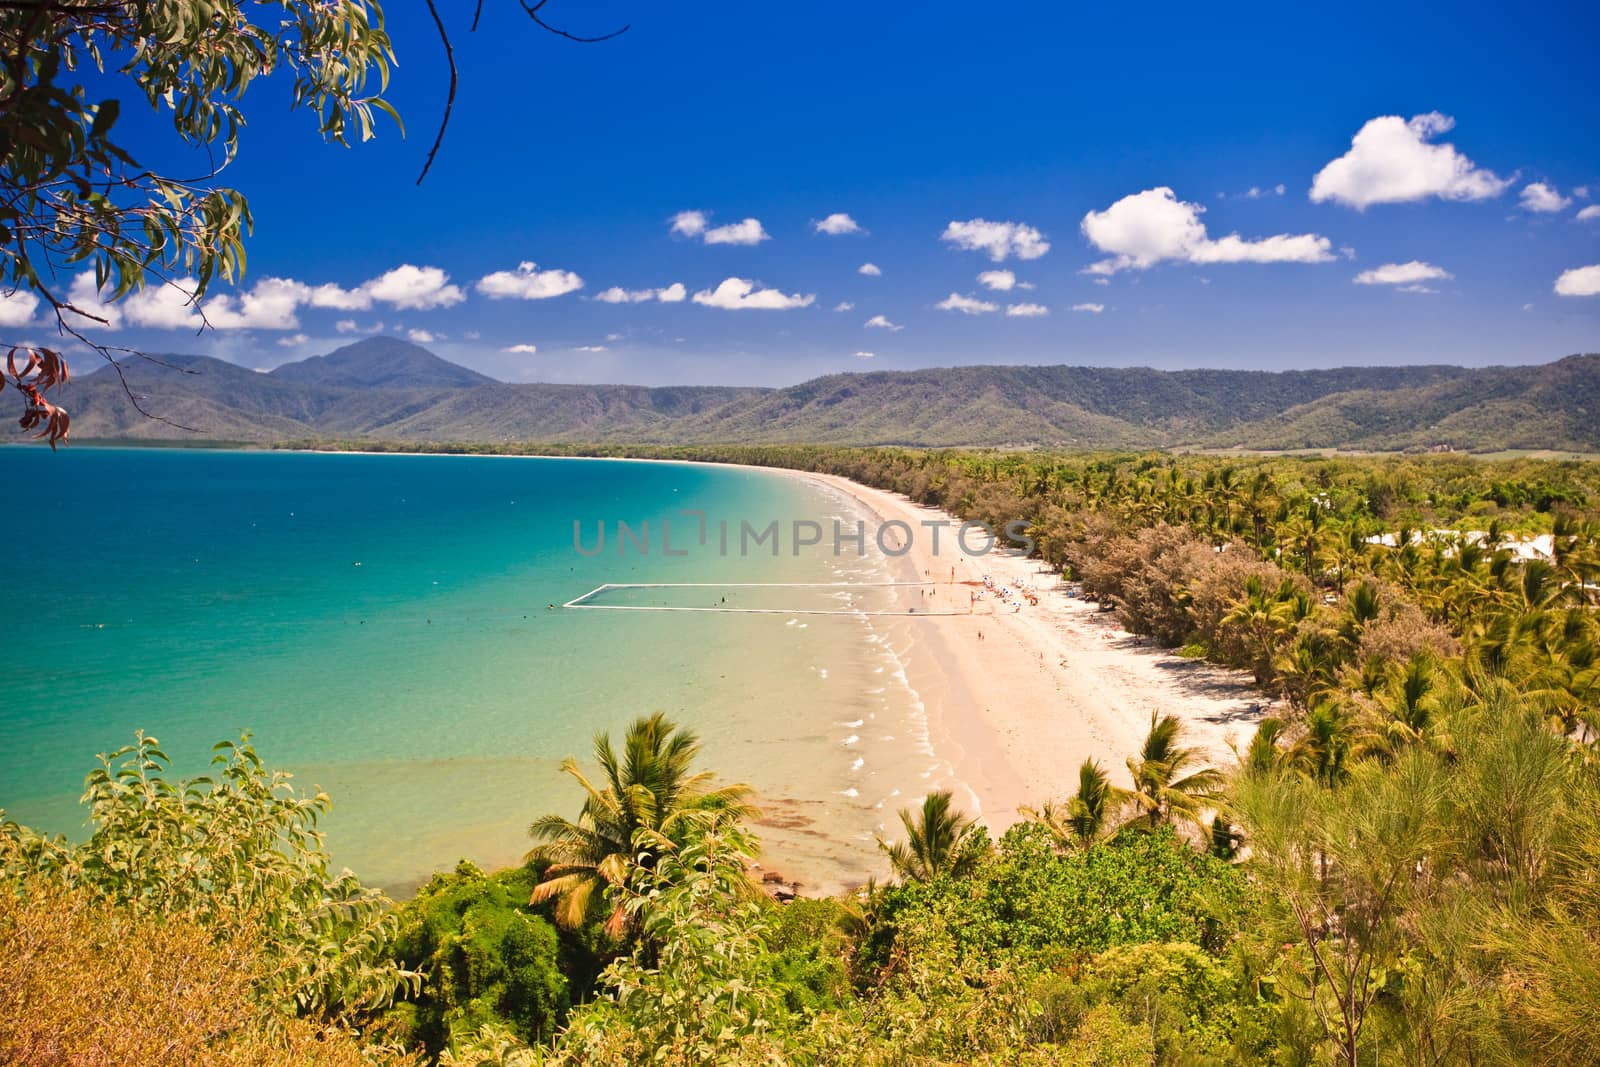 View of a beautiful tropical beach with golden sand fringed with lush vegetation and palm trees and an azure blue ocean